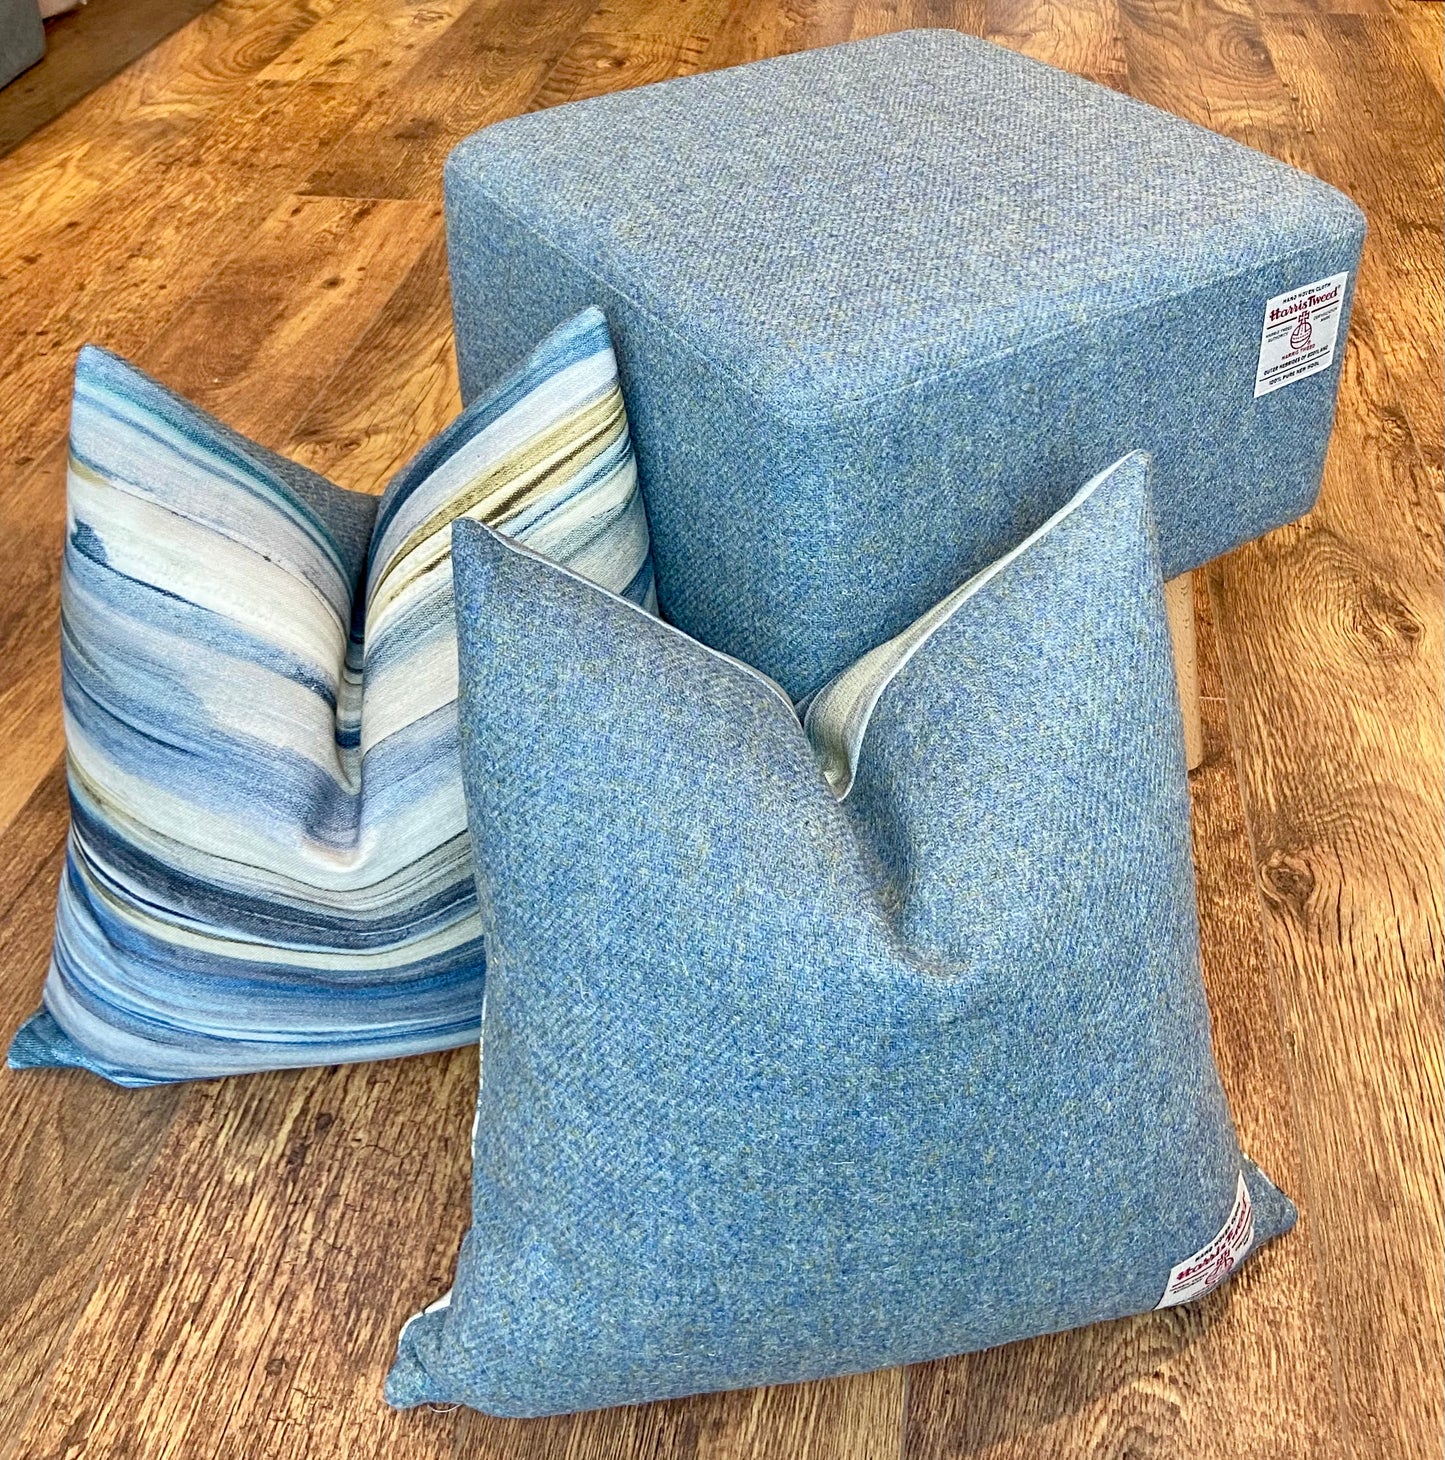 Sky Blue Square Footstool, Harris Tweed with Varnished Wooden Legs